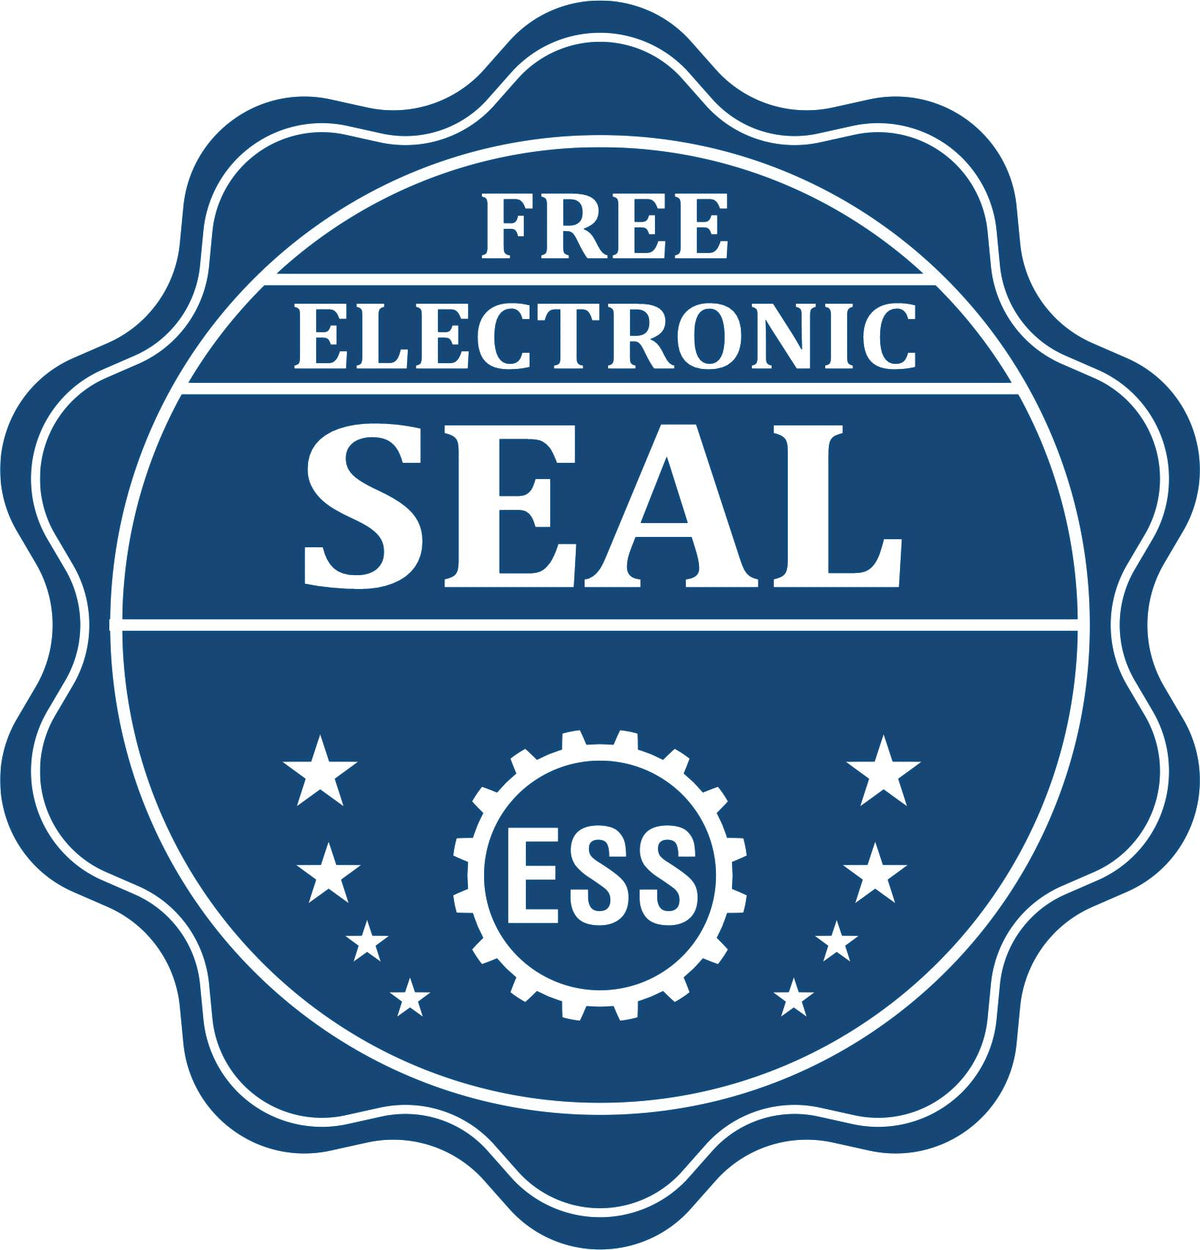 A badge showing a free electronic seal for the Slim Pre-Inked North Dakota Landscape Architect Seal Stamp with stars and the ESS gear on the emblem.